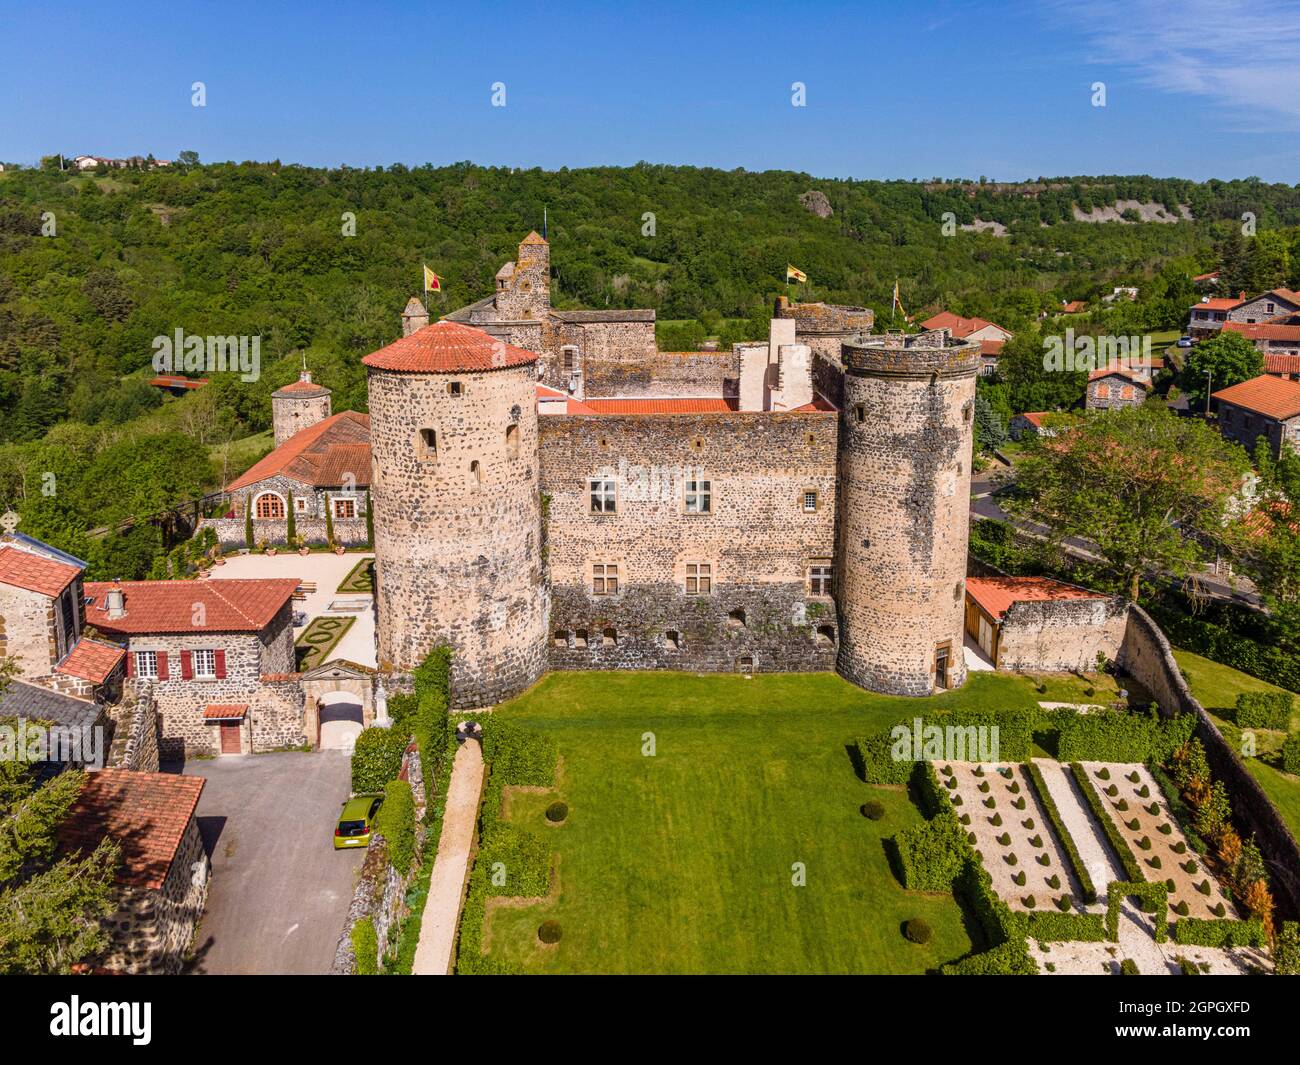 France, Haute Loire (43), Saint Vidal castle, medieval fortress near Puy en Velay, built and fortified from the 13th century to the 16th century, one of the jewels of military architecture of Auvergne and the one of the best preserved fortresses in the region (aerial view) Stock Photo